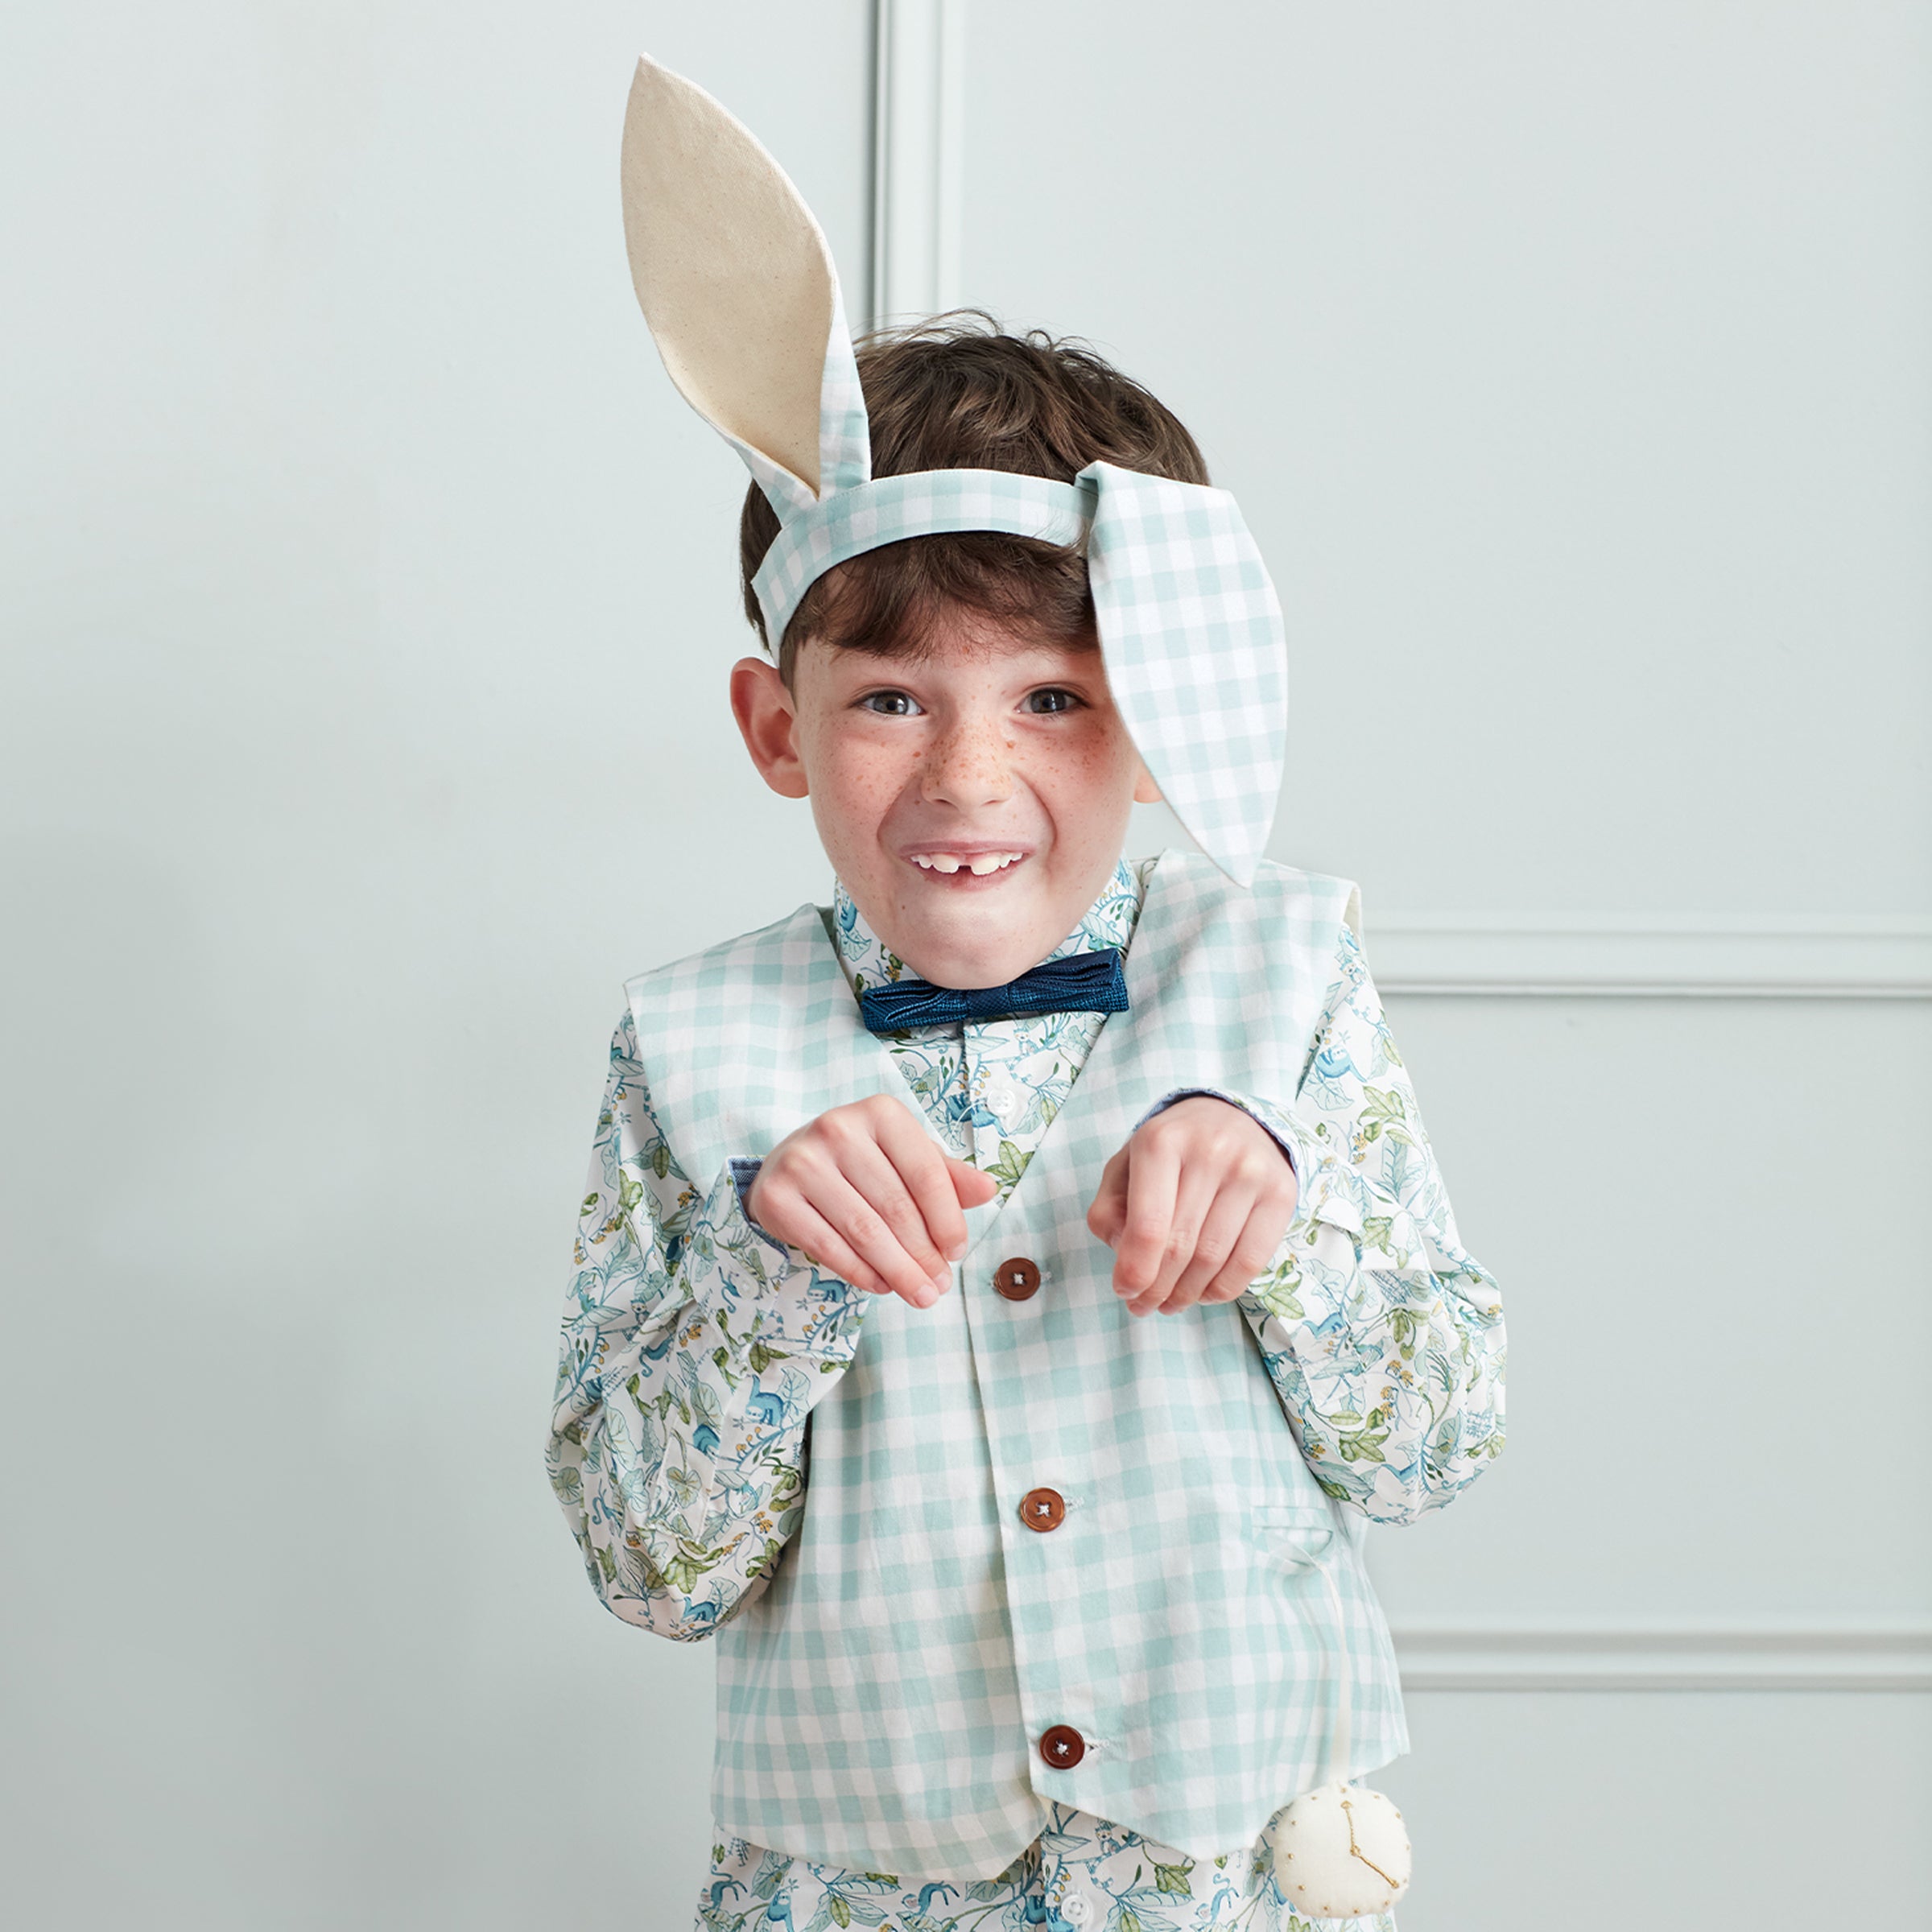 Our Easter outfit of bunny ears and a gingham waistcoat with pompom tail is gorgeous.